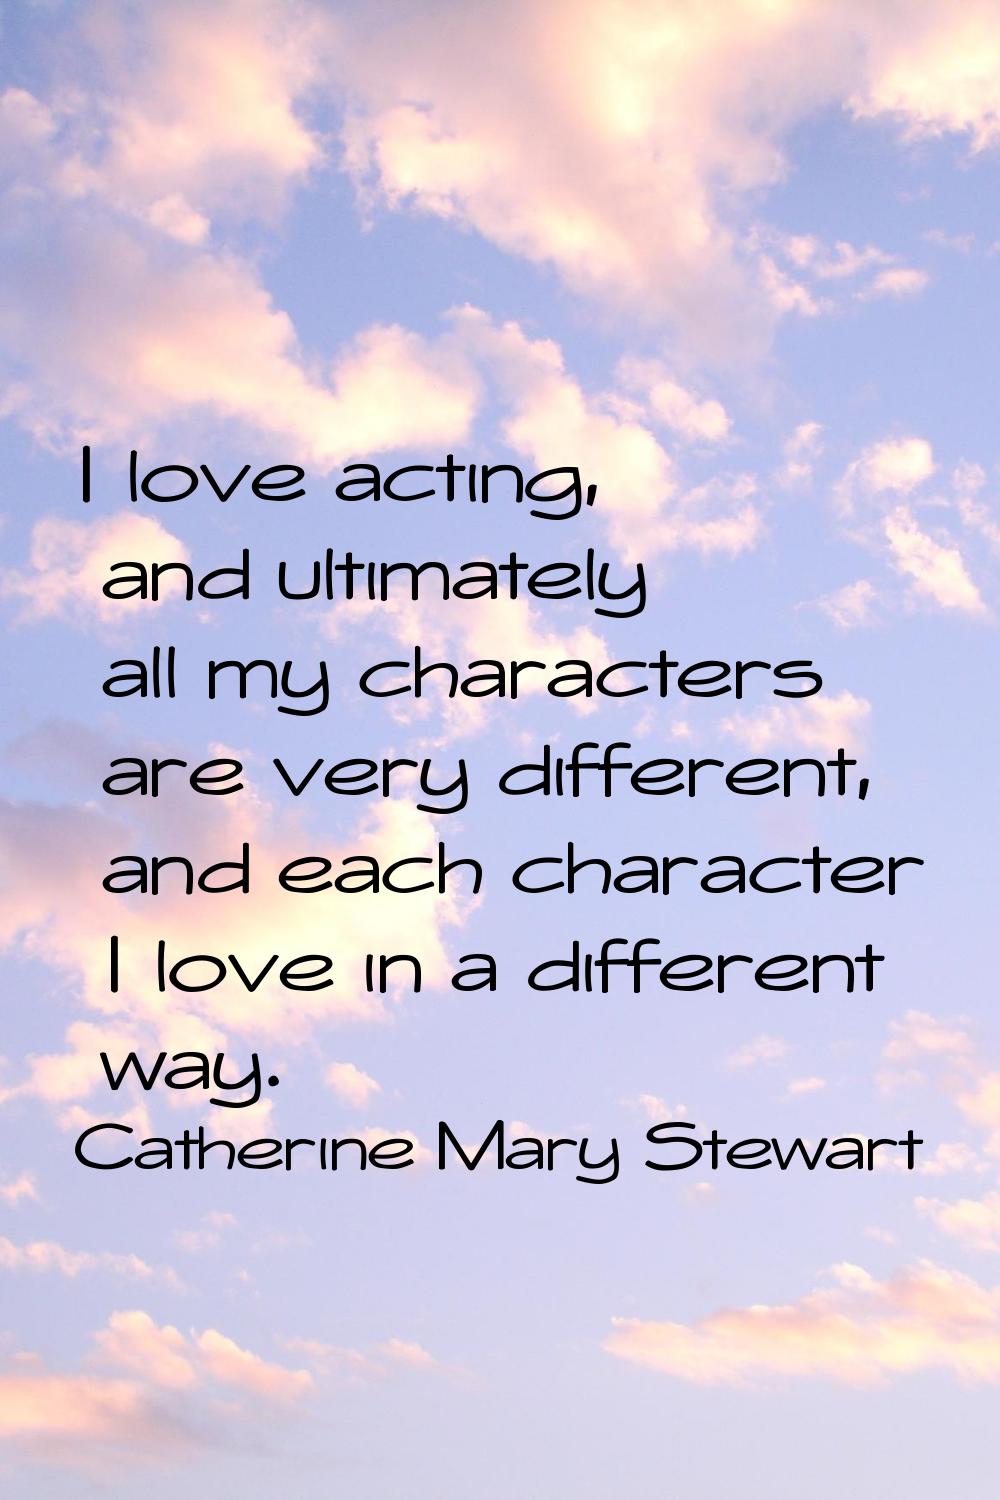 I love acting, and ultimately all my characters are very different, and each character I love in a 